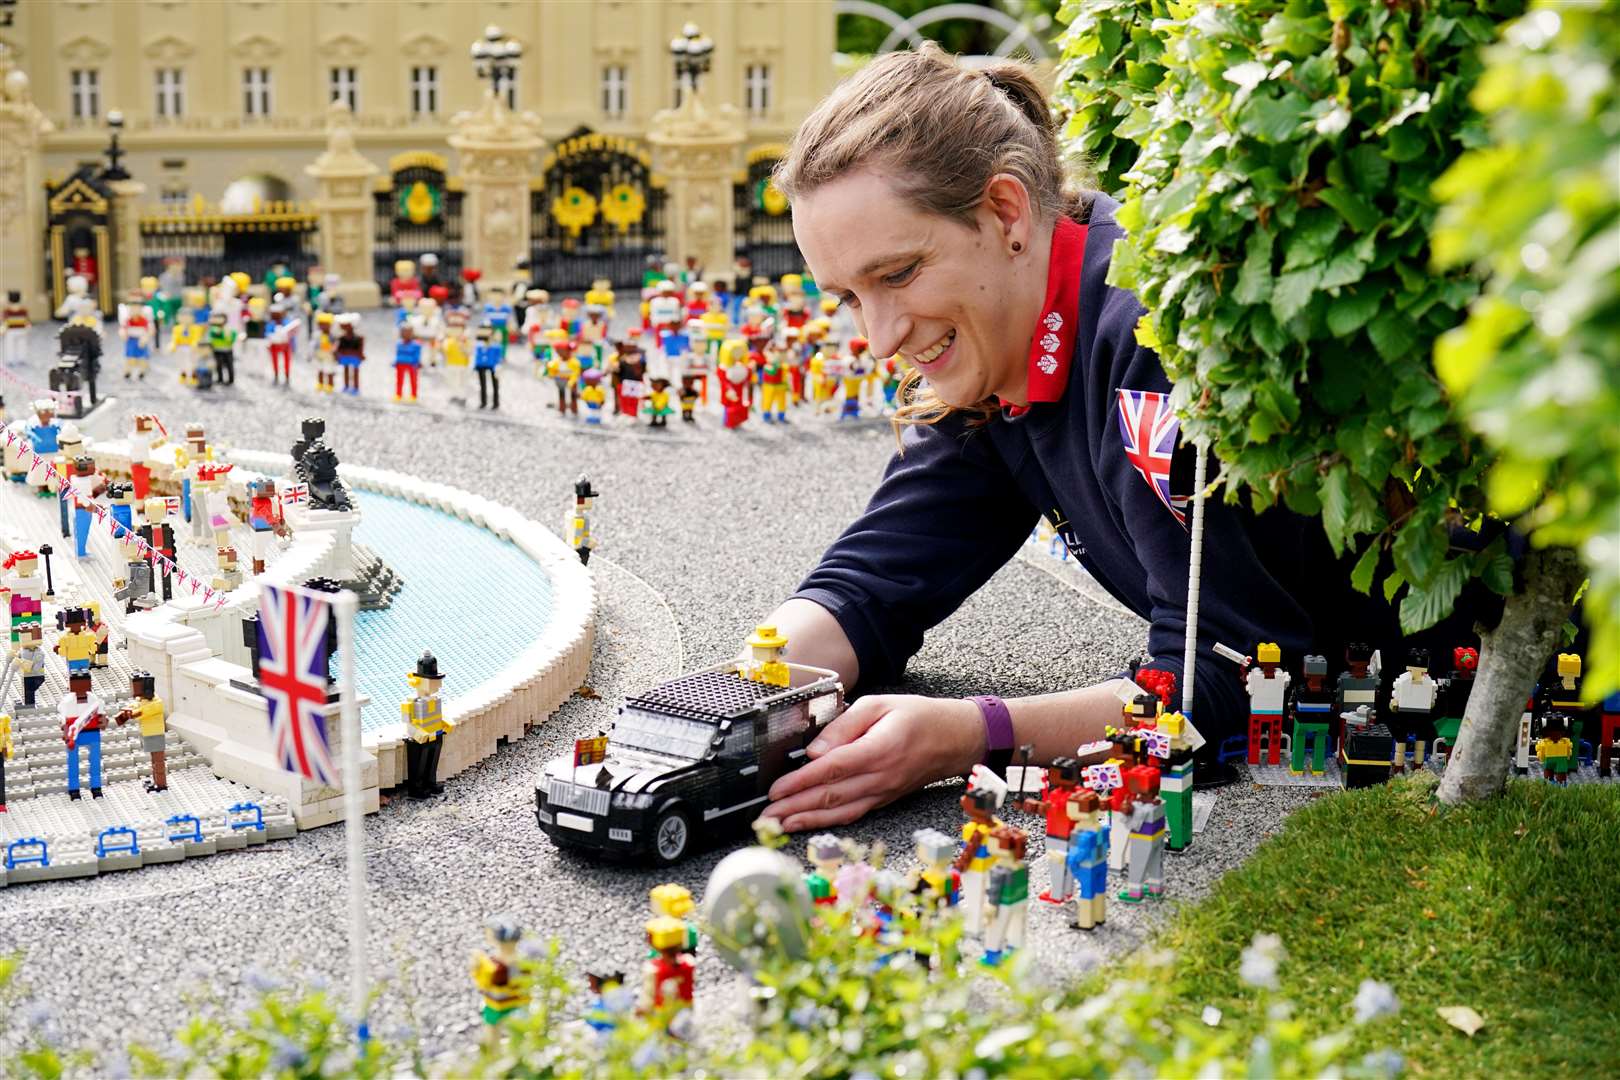 Model Maker Freya Groom places a replica of the Queen, re-imagined in Lego Bricks (Jonathan Brady/PA)